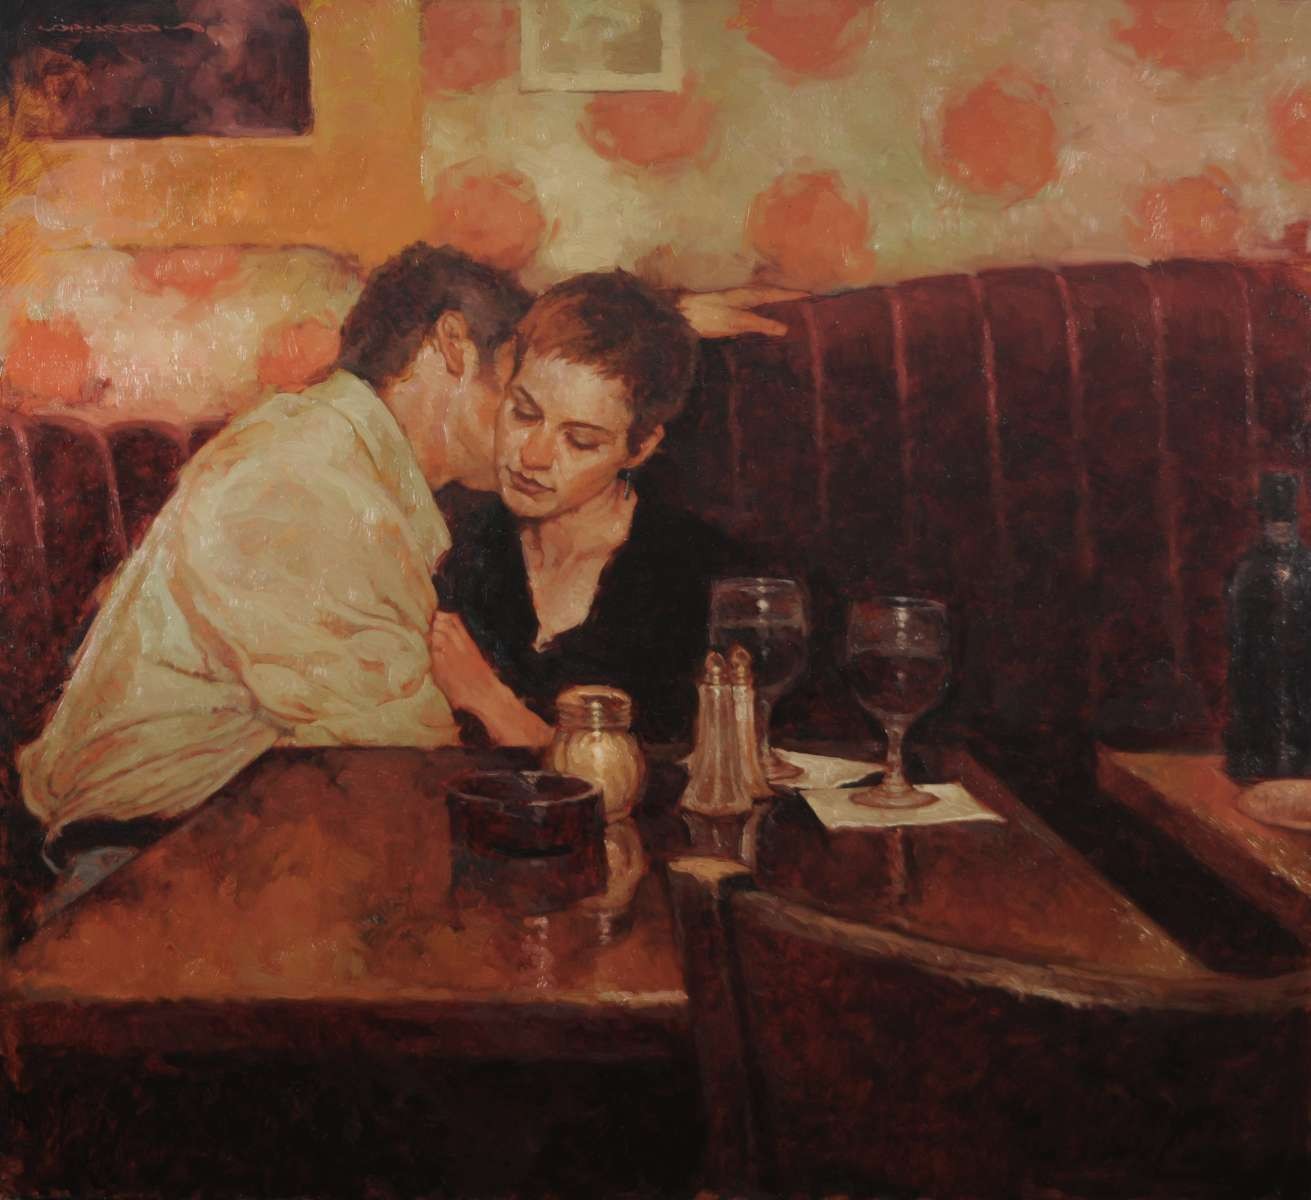 painting by Joseph Lorusso